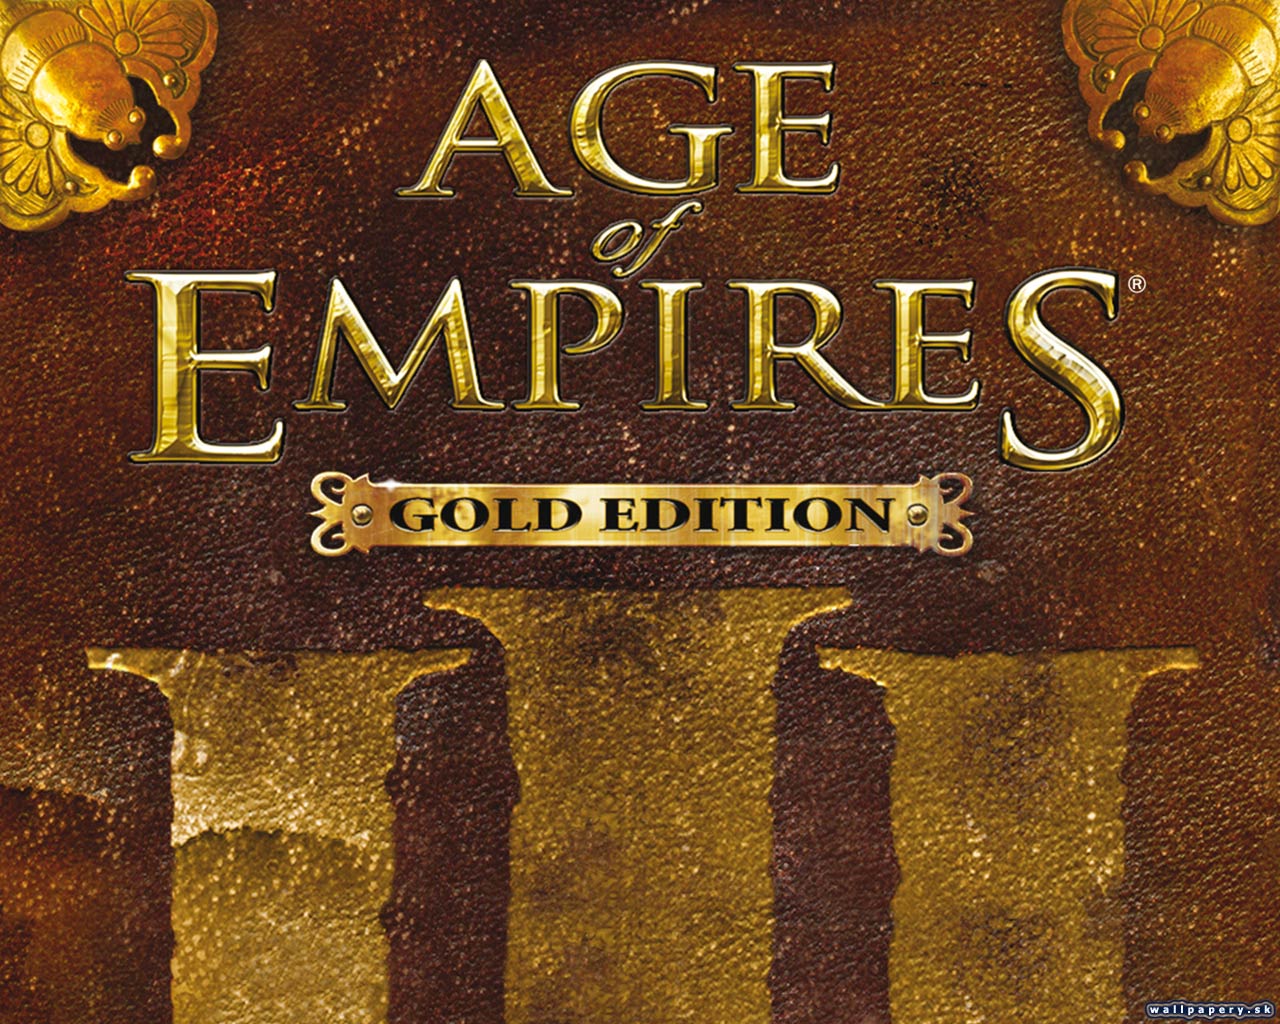 Age of Empires 3: Gold Edition - wallpaper 1